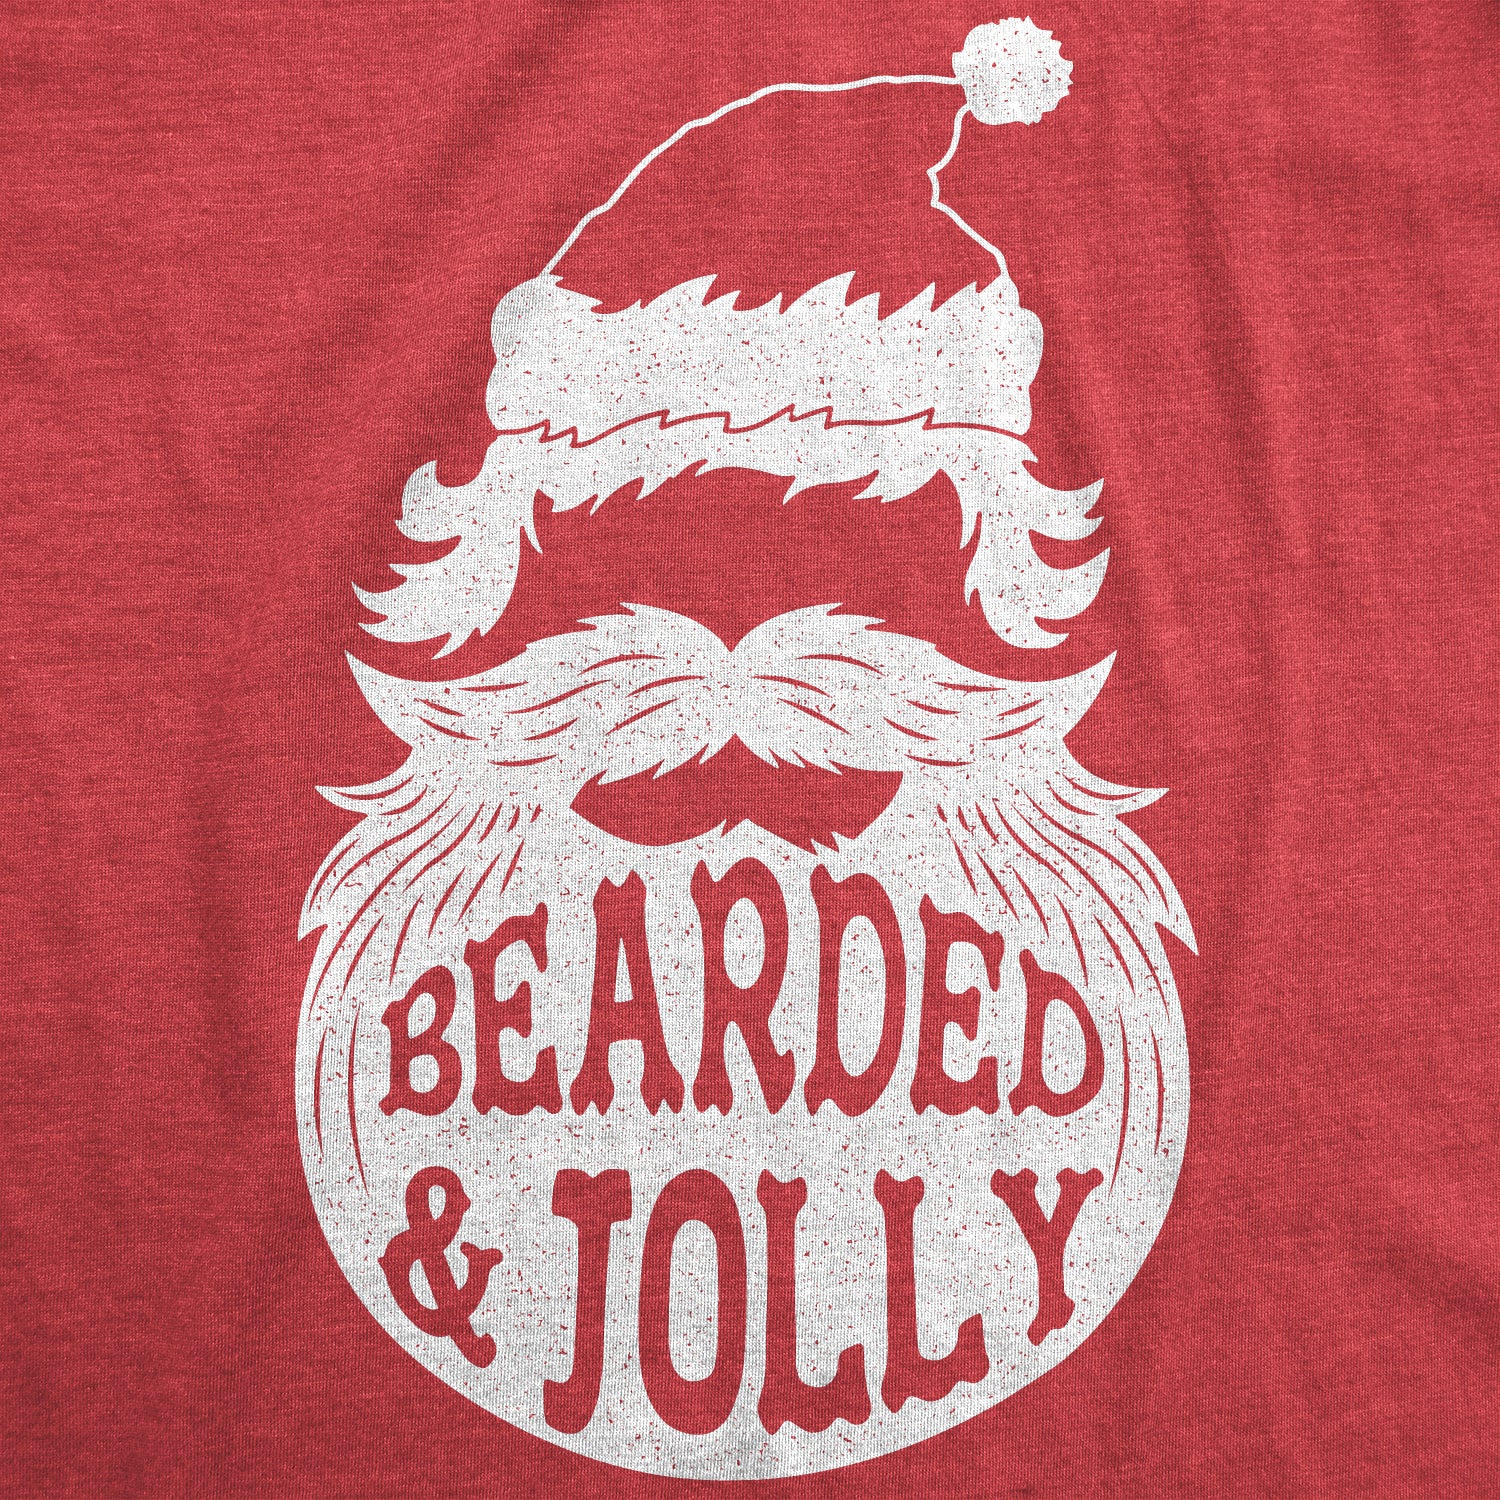 Funny Heather Red - Bearded Jolly Bearded And Jolly Mens T Shirt Nerdy Christmas Tee